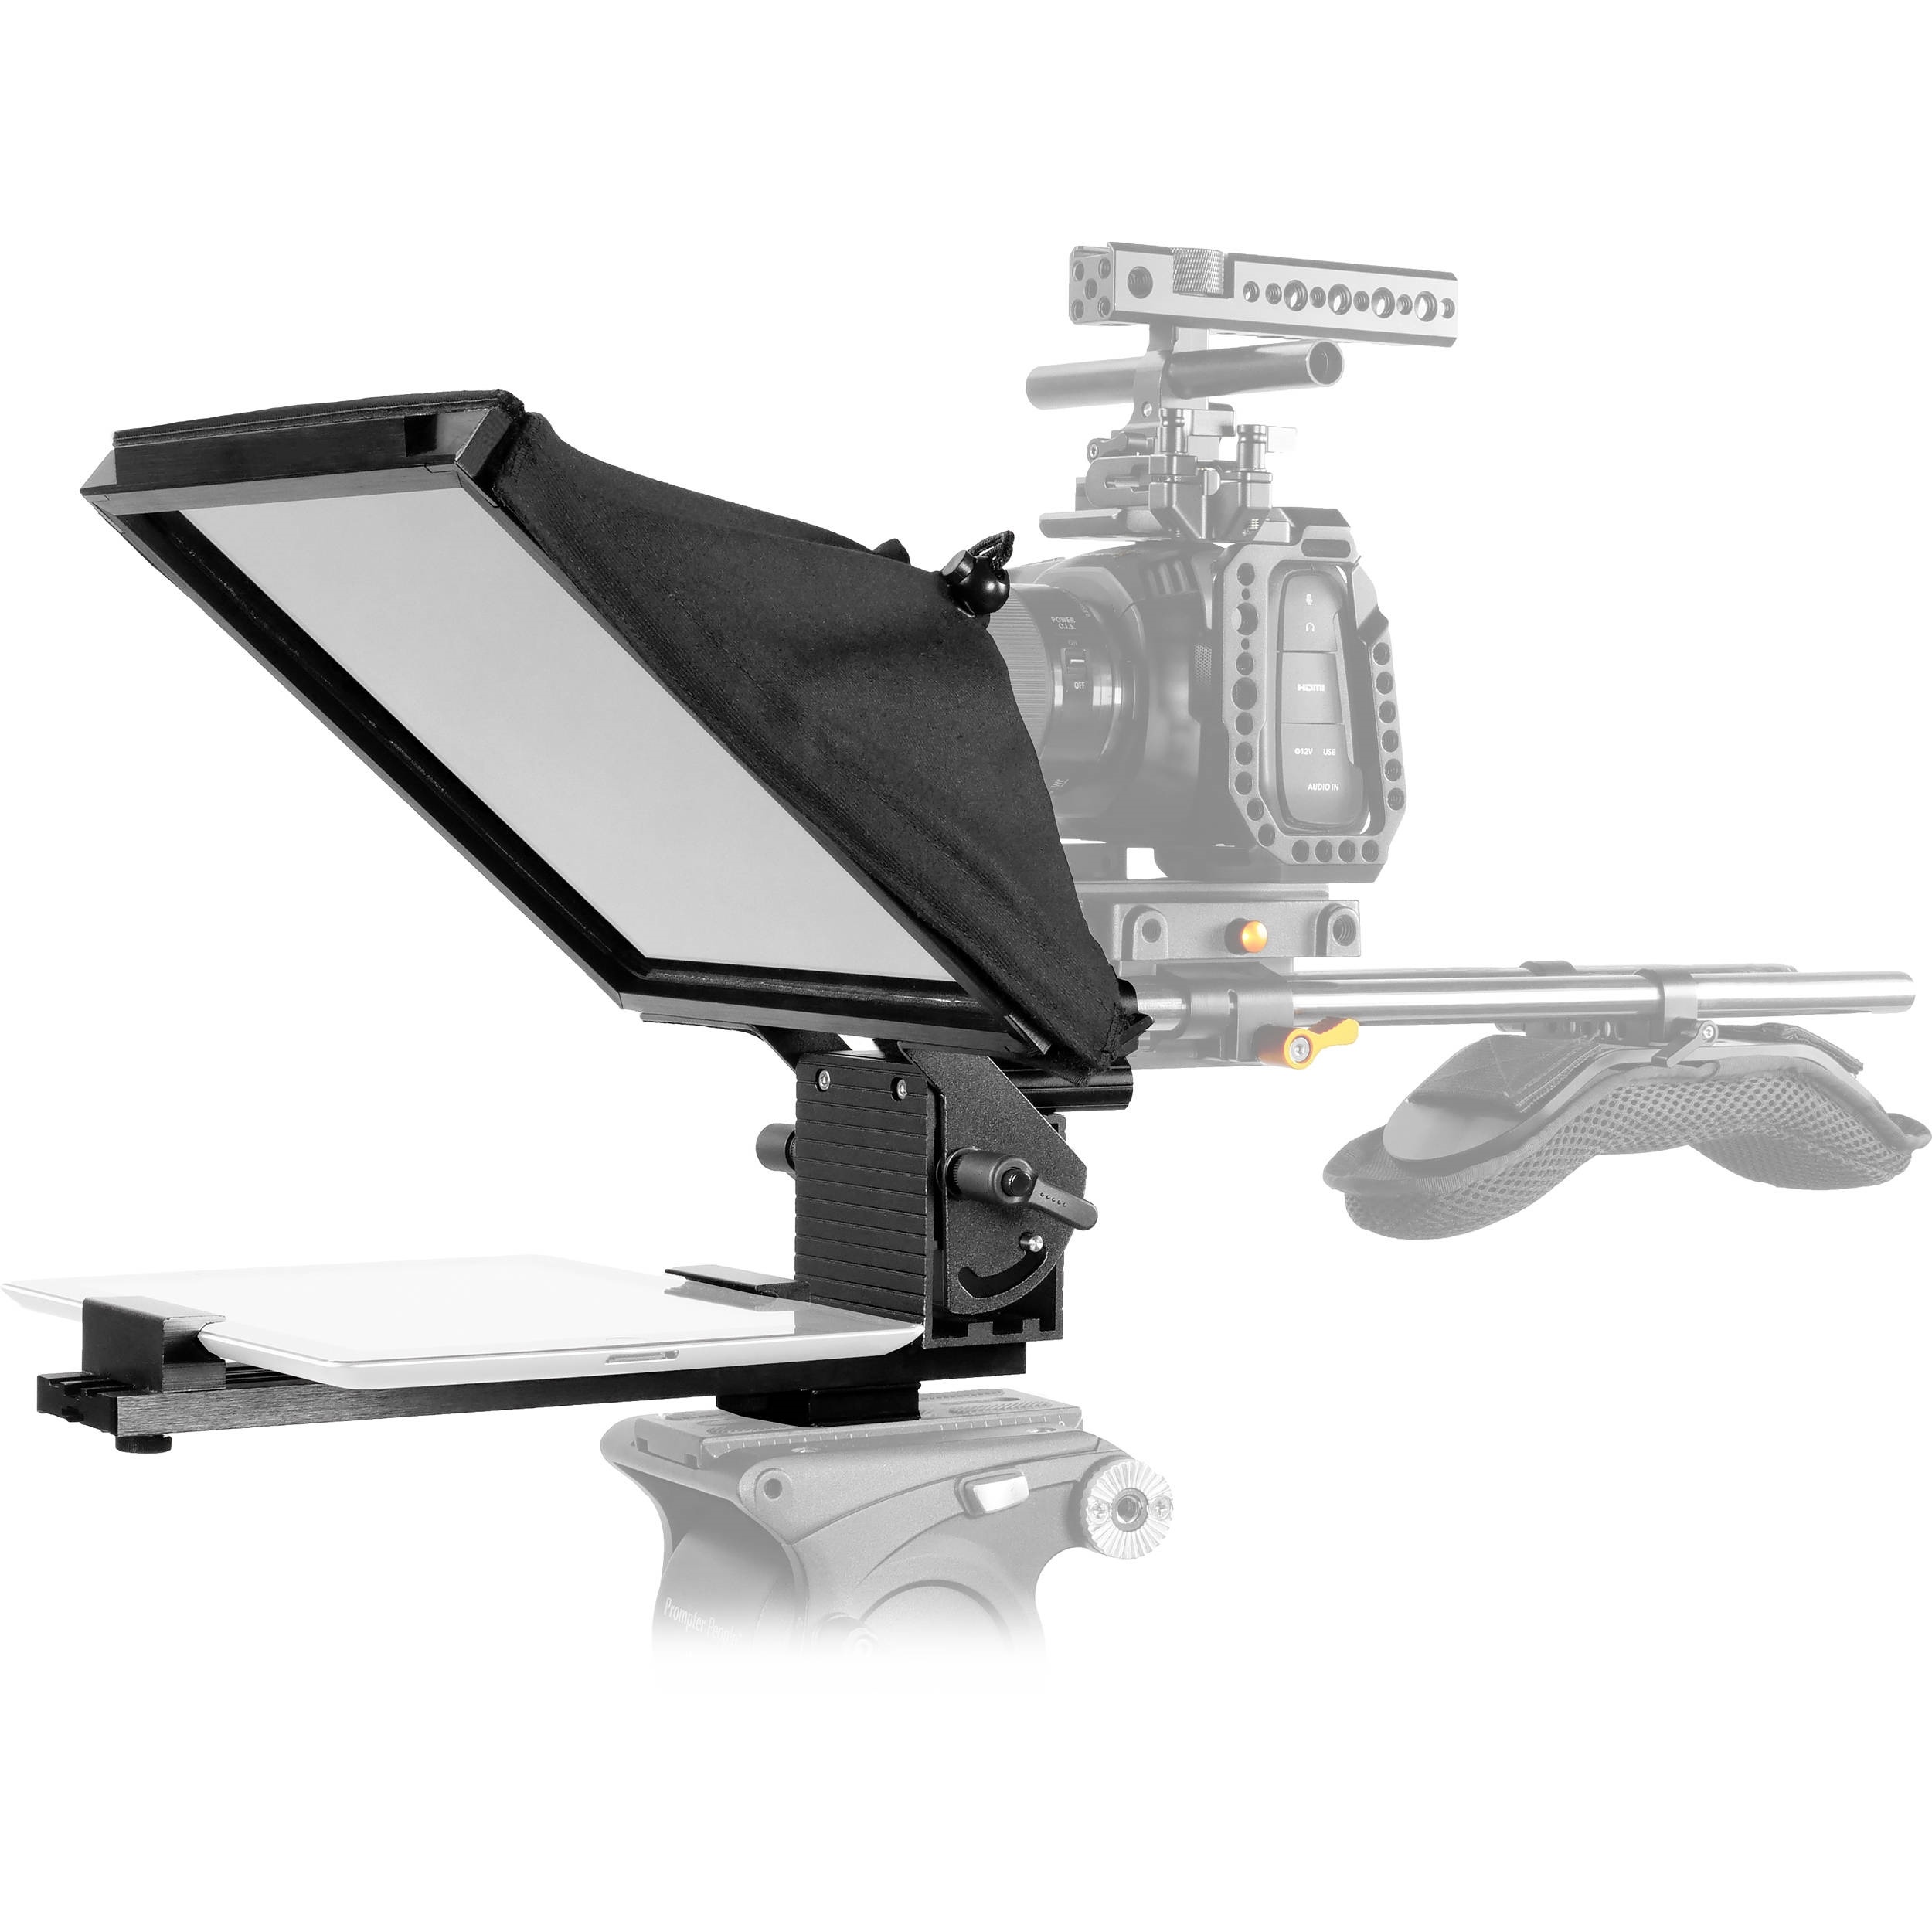 Prompter People Prompter Pal PAL-iPAD-15mm Teleprompter w/ Tablet Cradle, 10 x 10", 15mm Rod Block